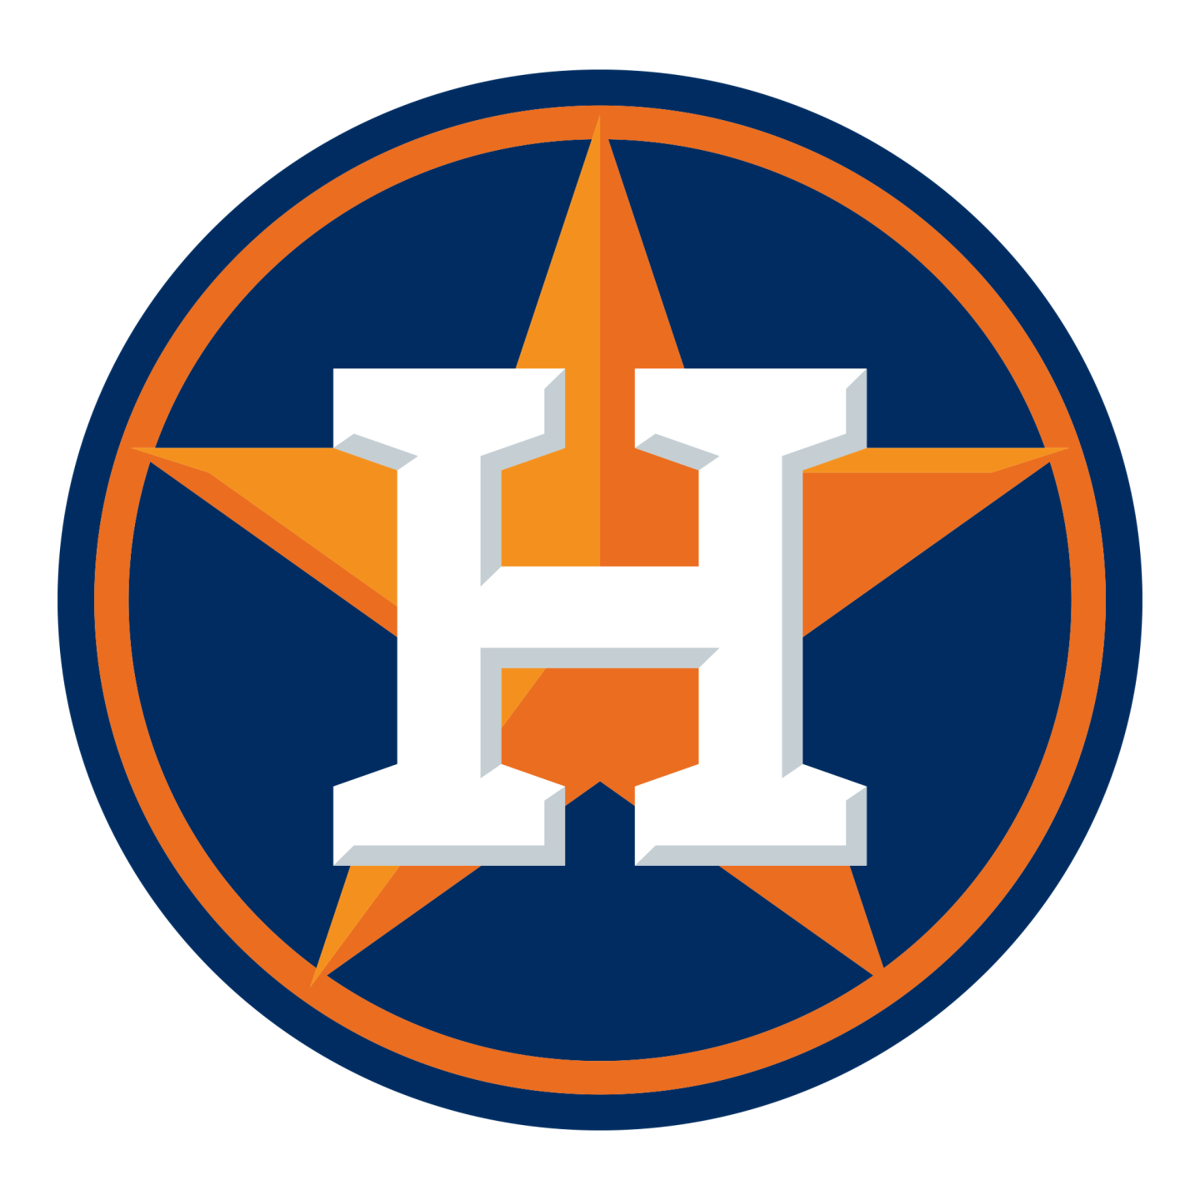 Correa, Springer rally Astros past A's 10-5 in ALDS opener